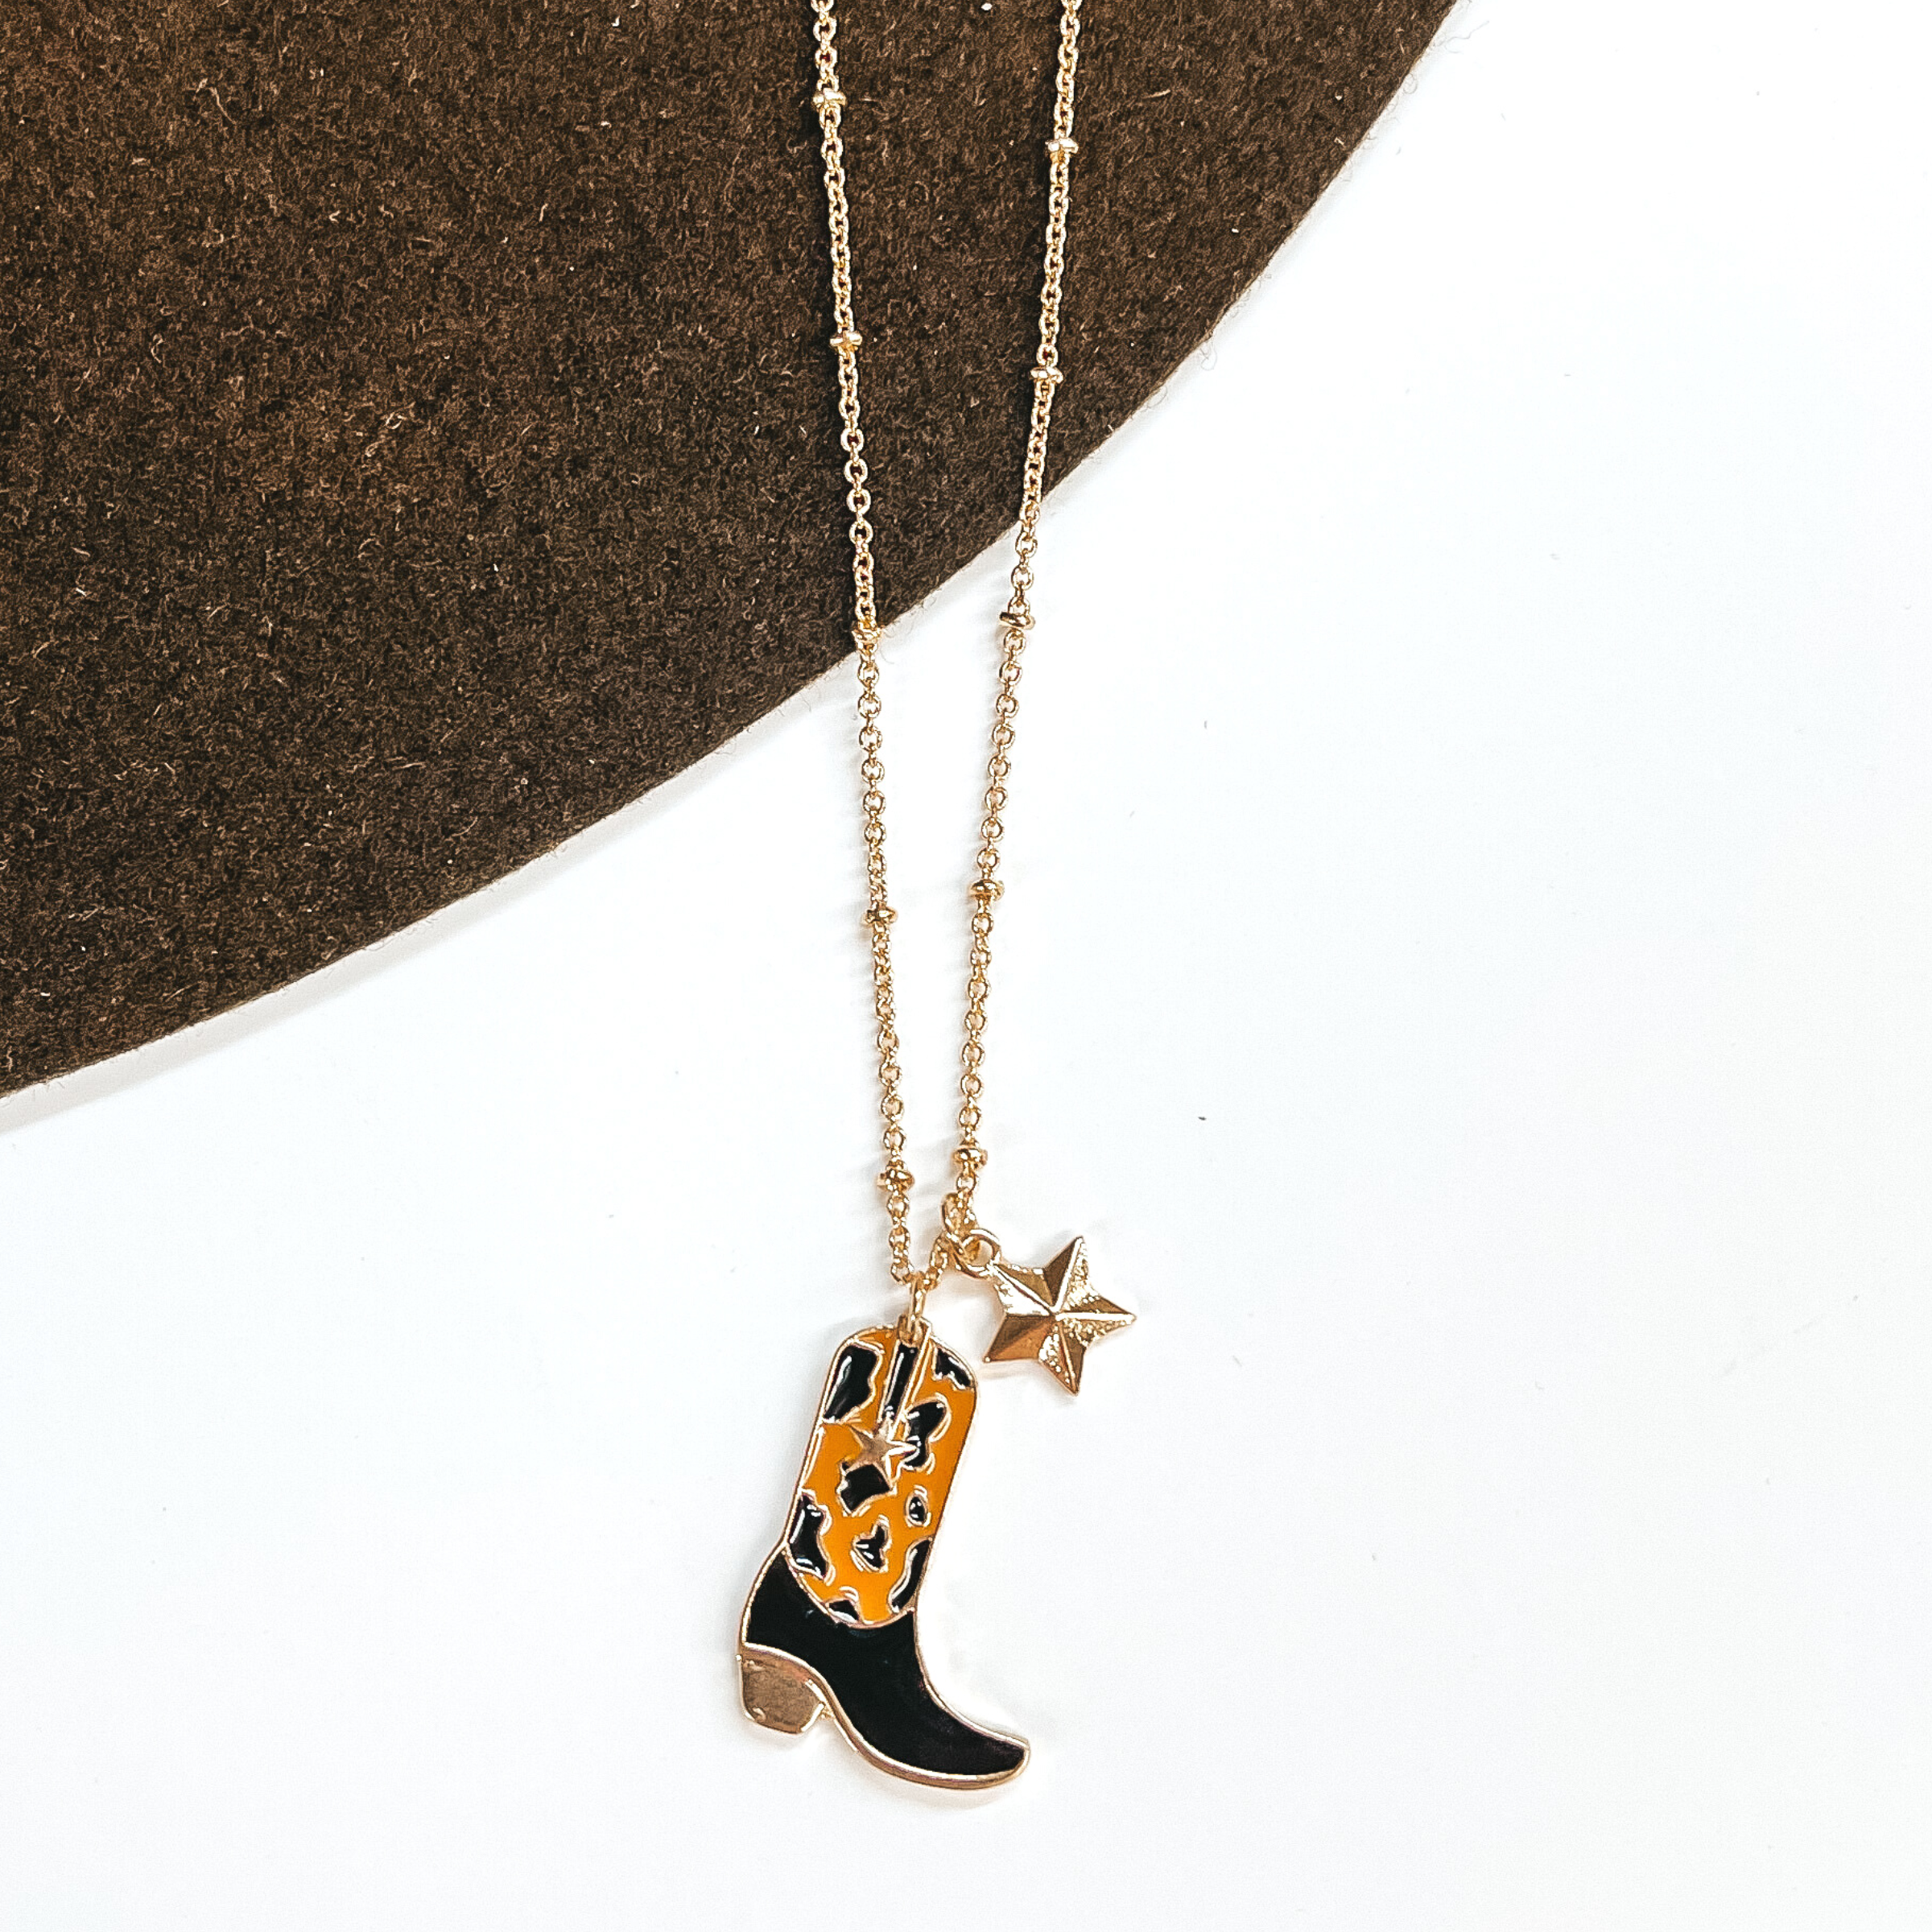 Gold chain necklace with a gold star charm and a black and tan cow print boot charm. This necklace is pictured on a white and brown background.